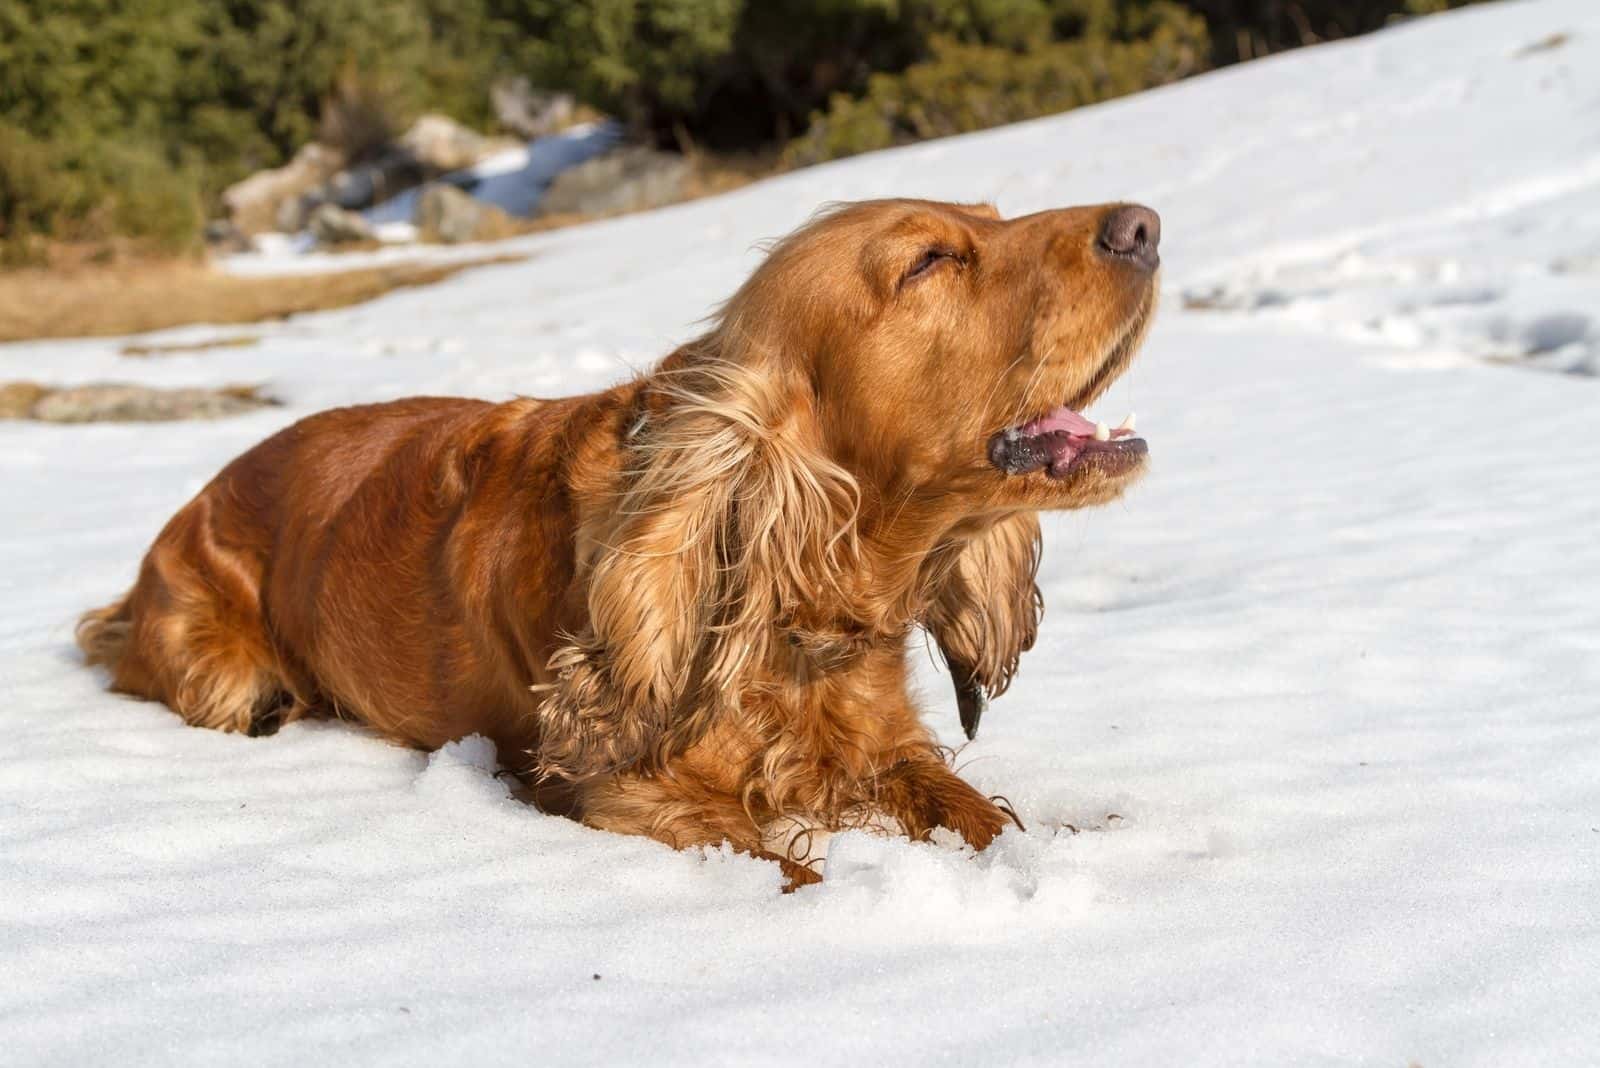 cocker spaniel barking while lying down in the snow